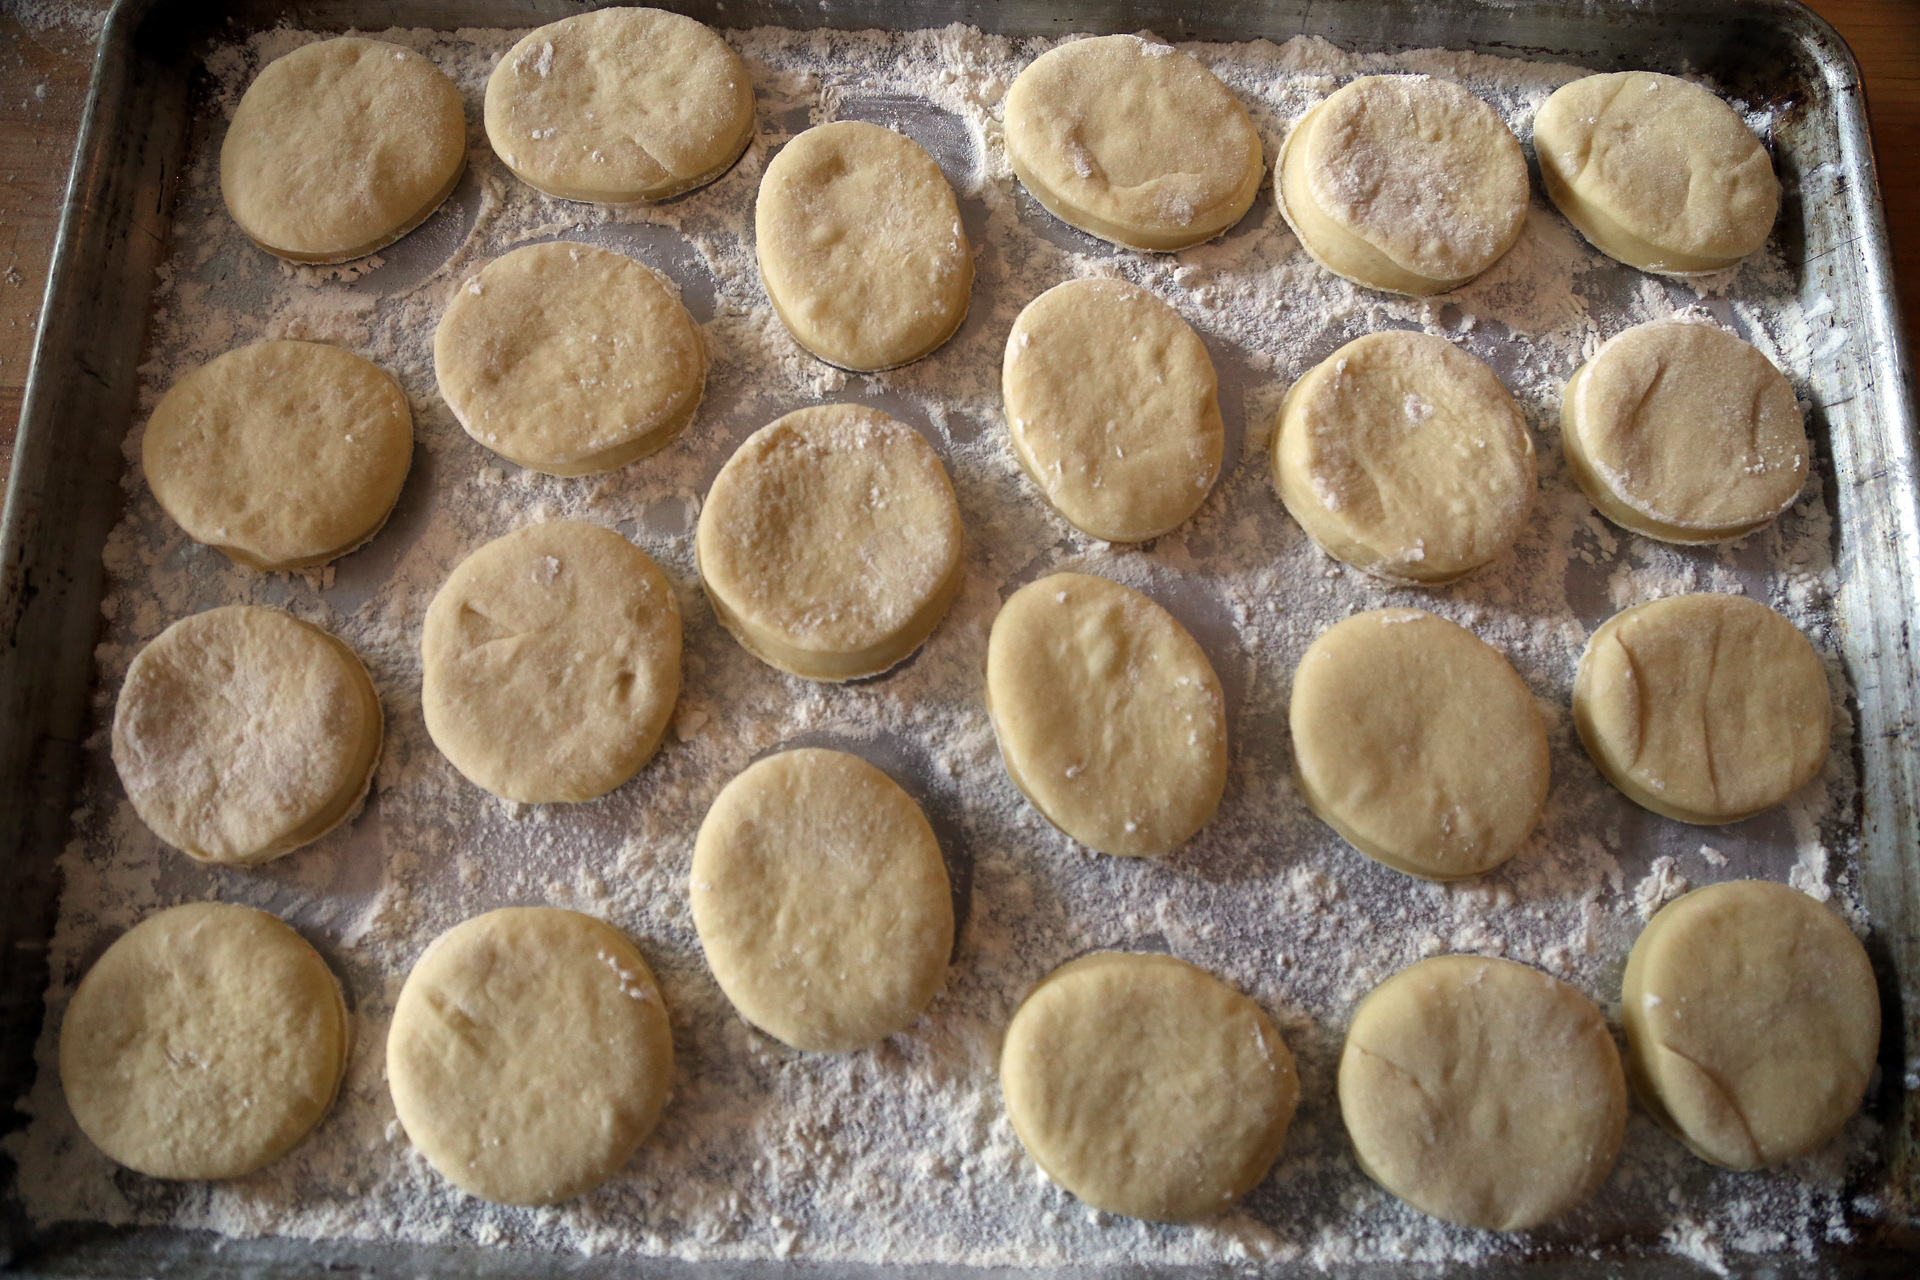 Place the dough rounds at least 1 inch apart on the baking sheet.